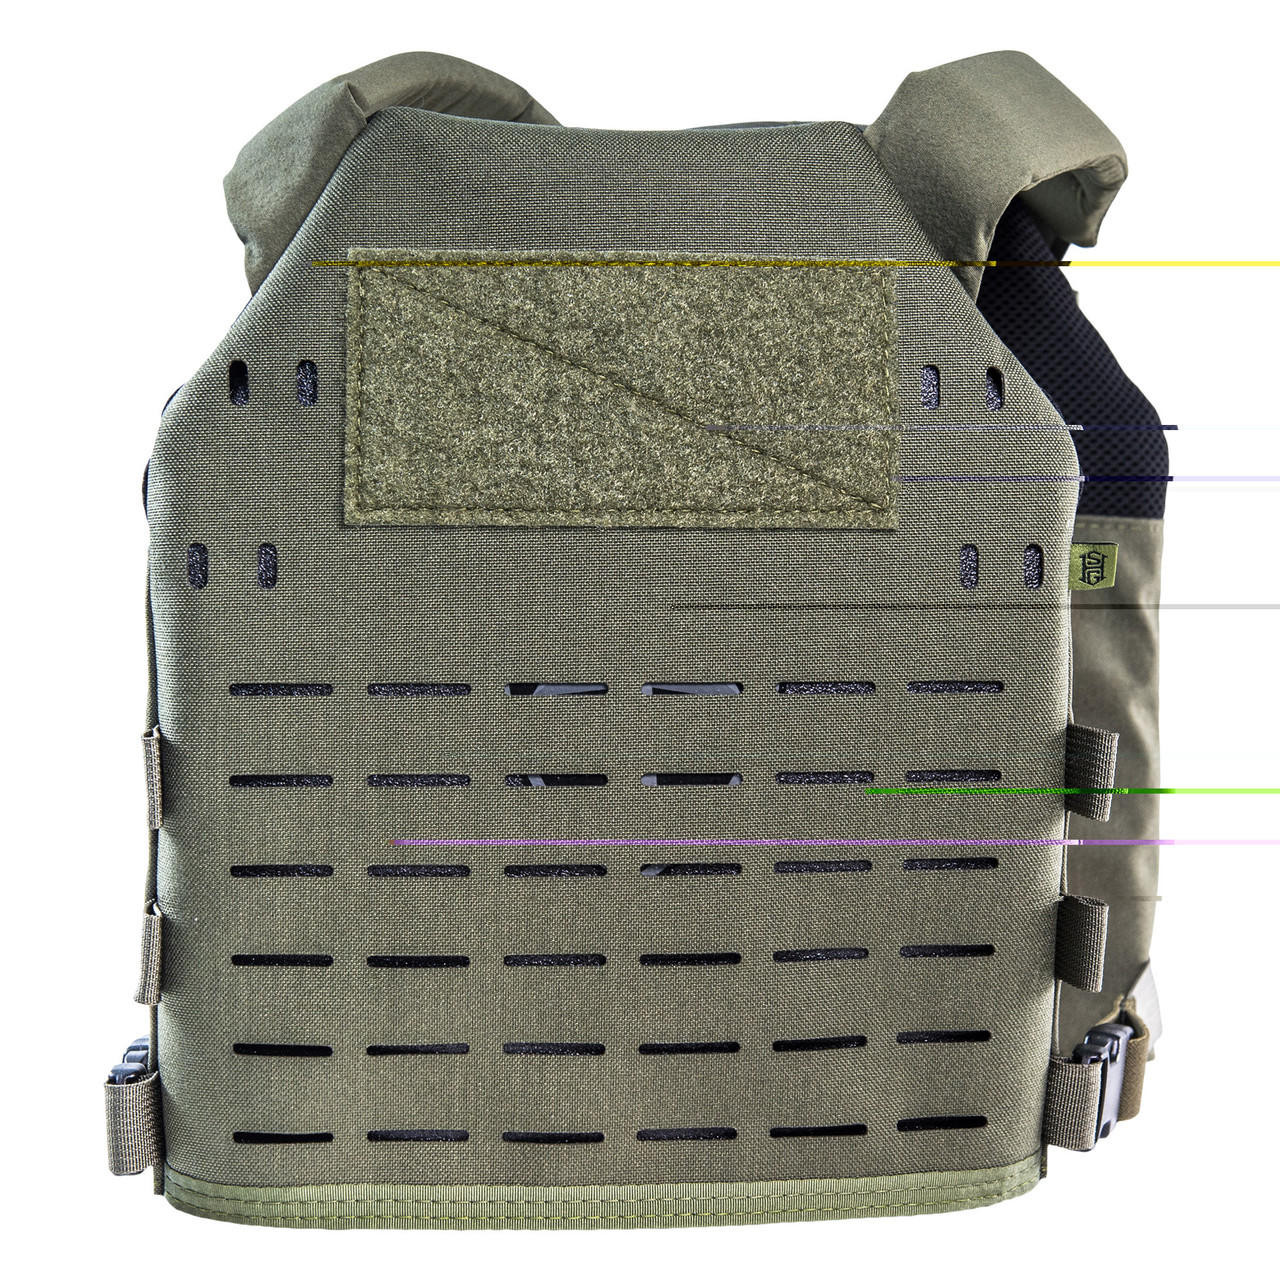 Sheffield Backpack Chest pack combination